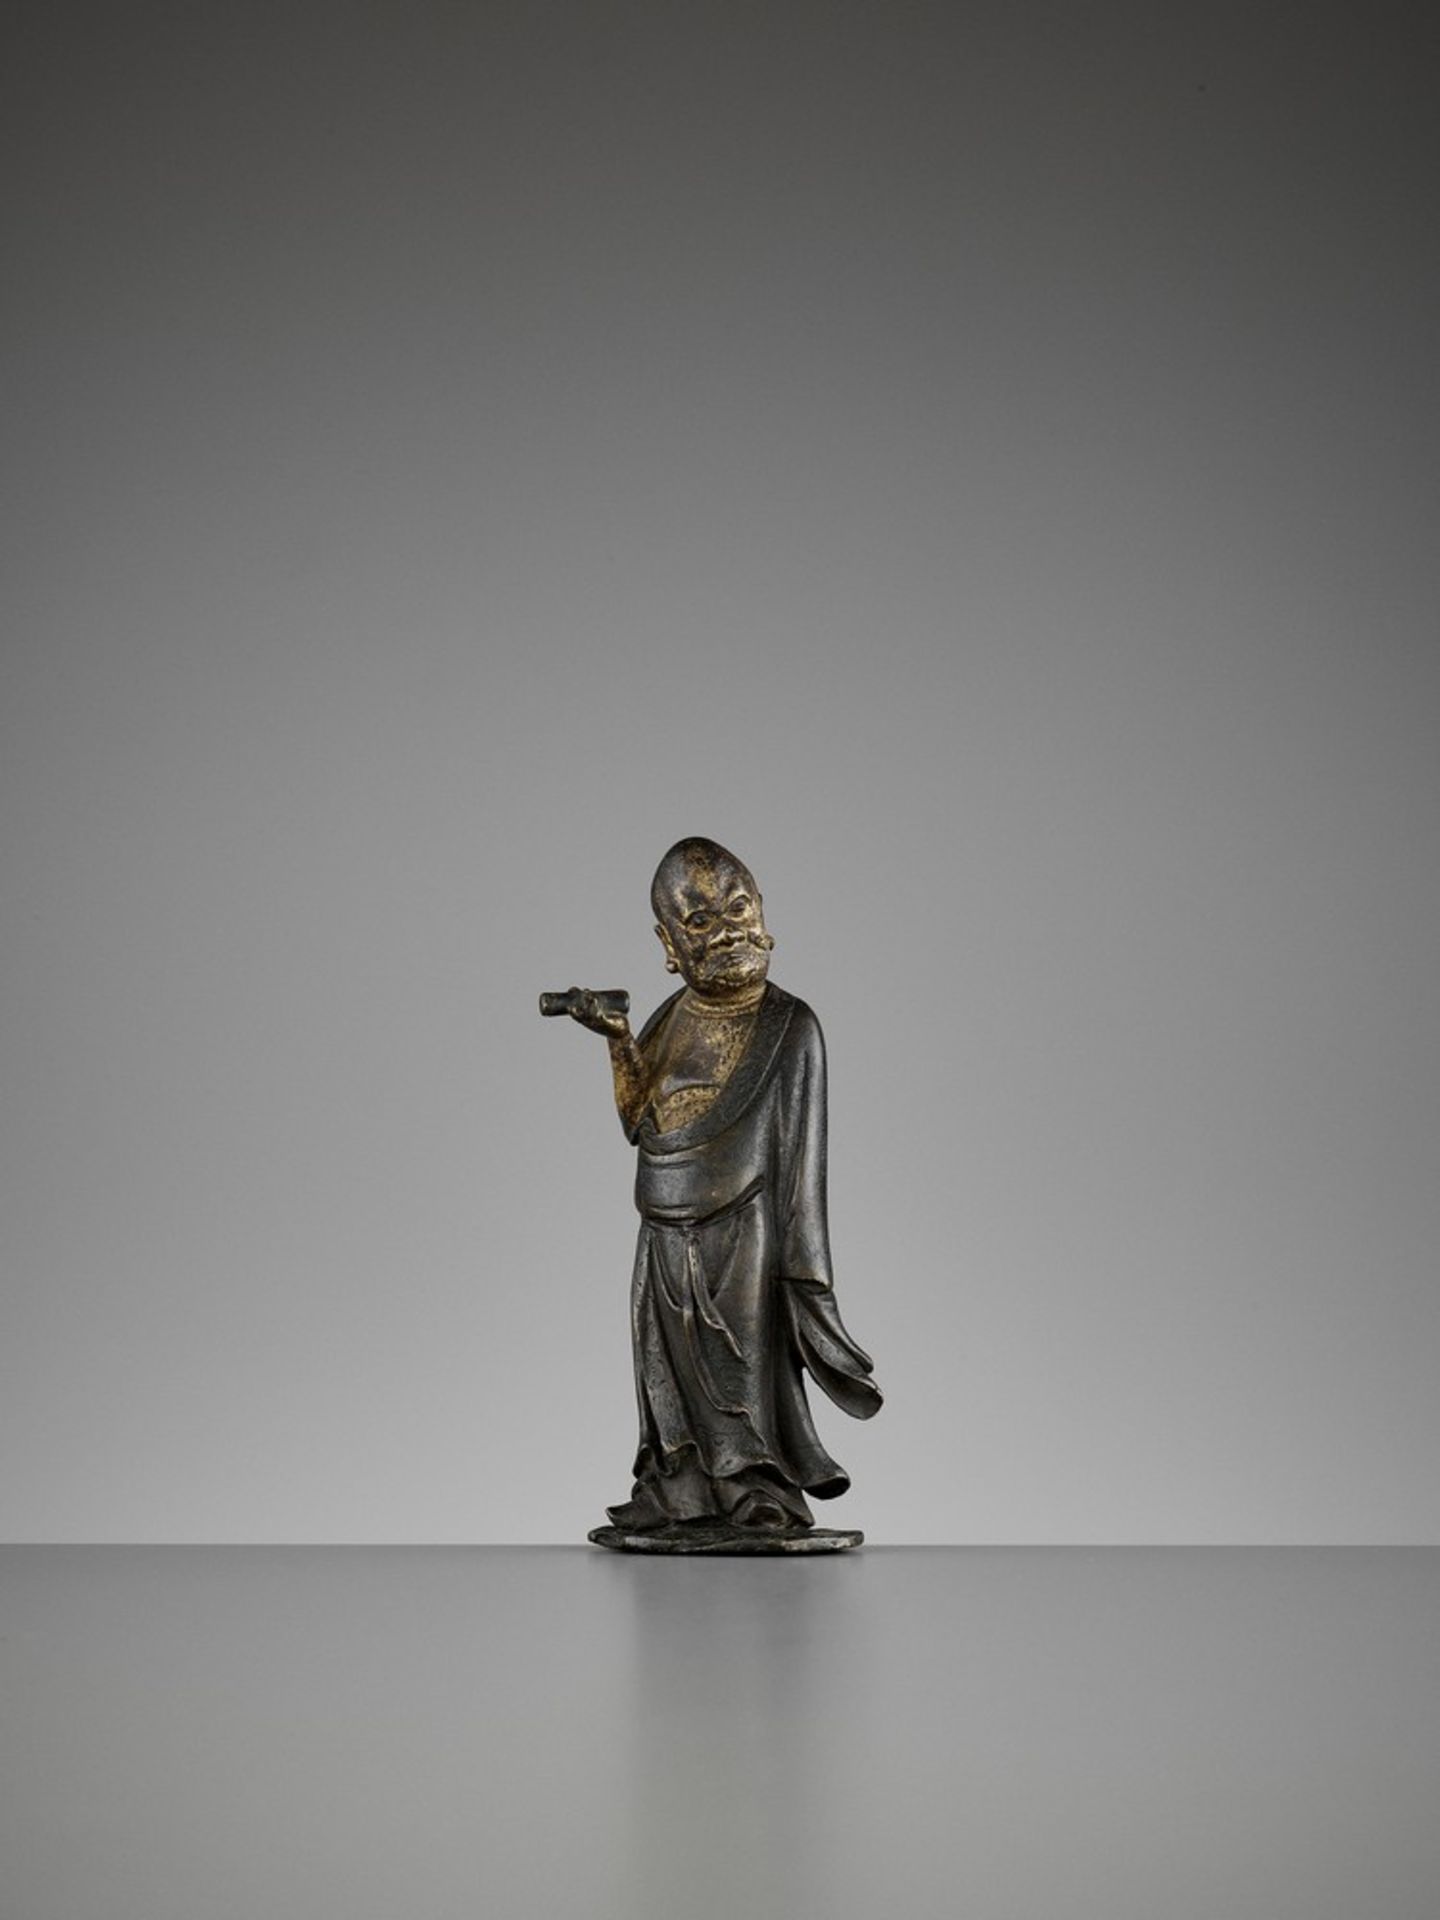 A LACQUER-GILT BRONZE FIGURE OF A LUOHAN, MING